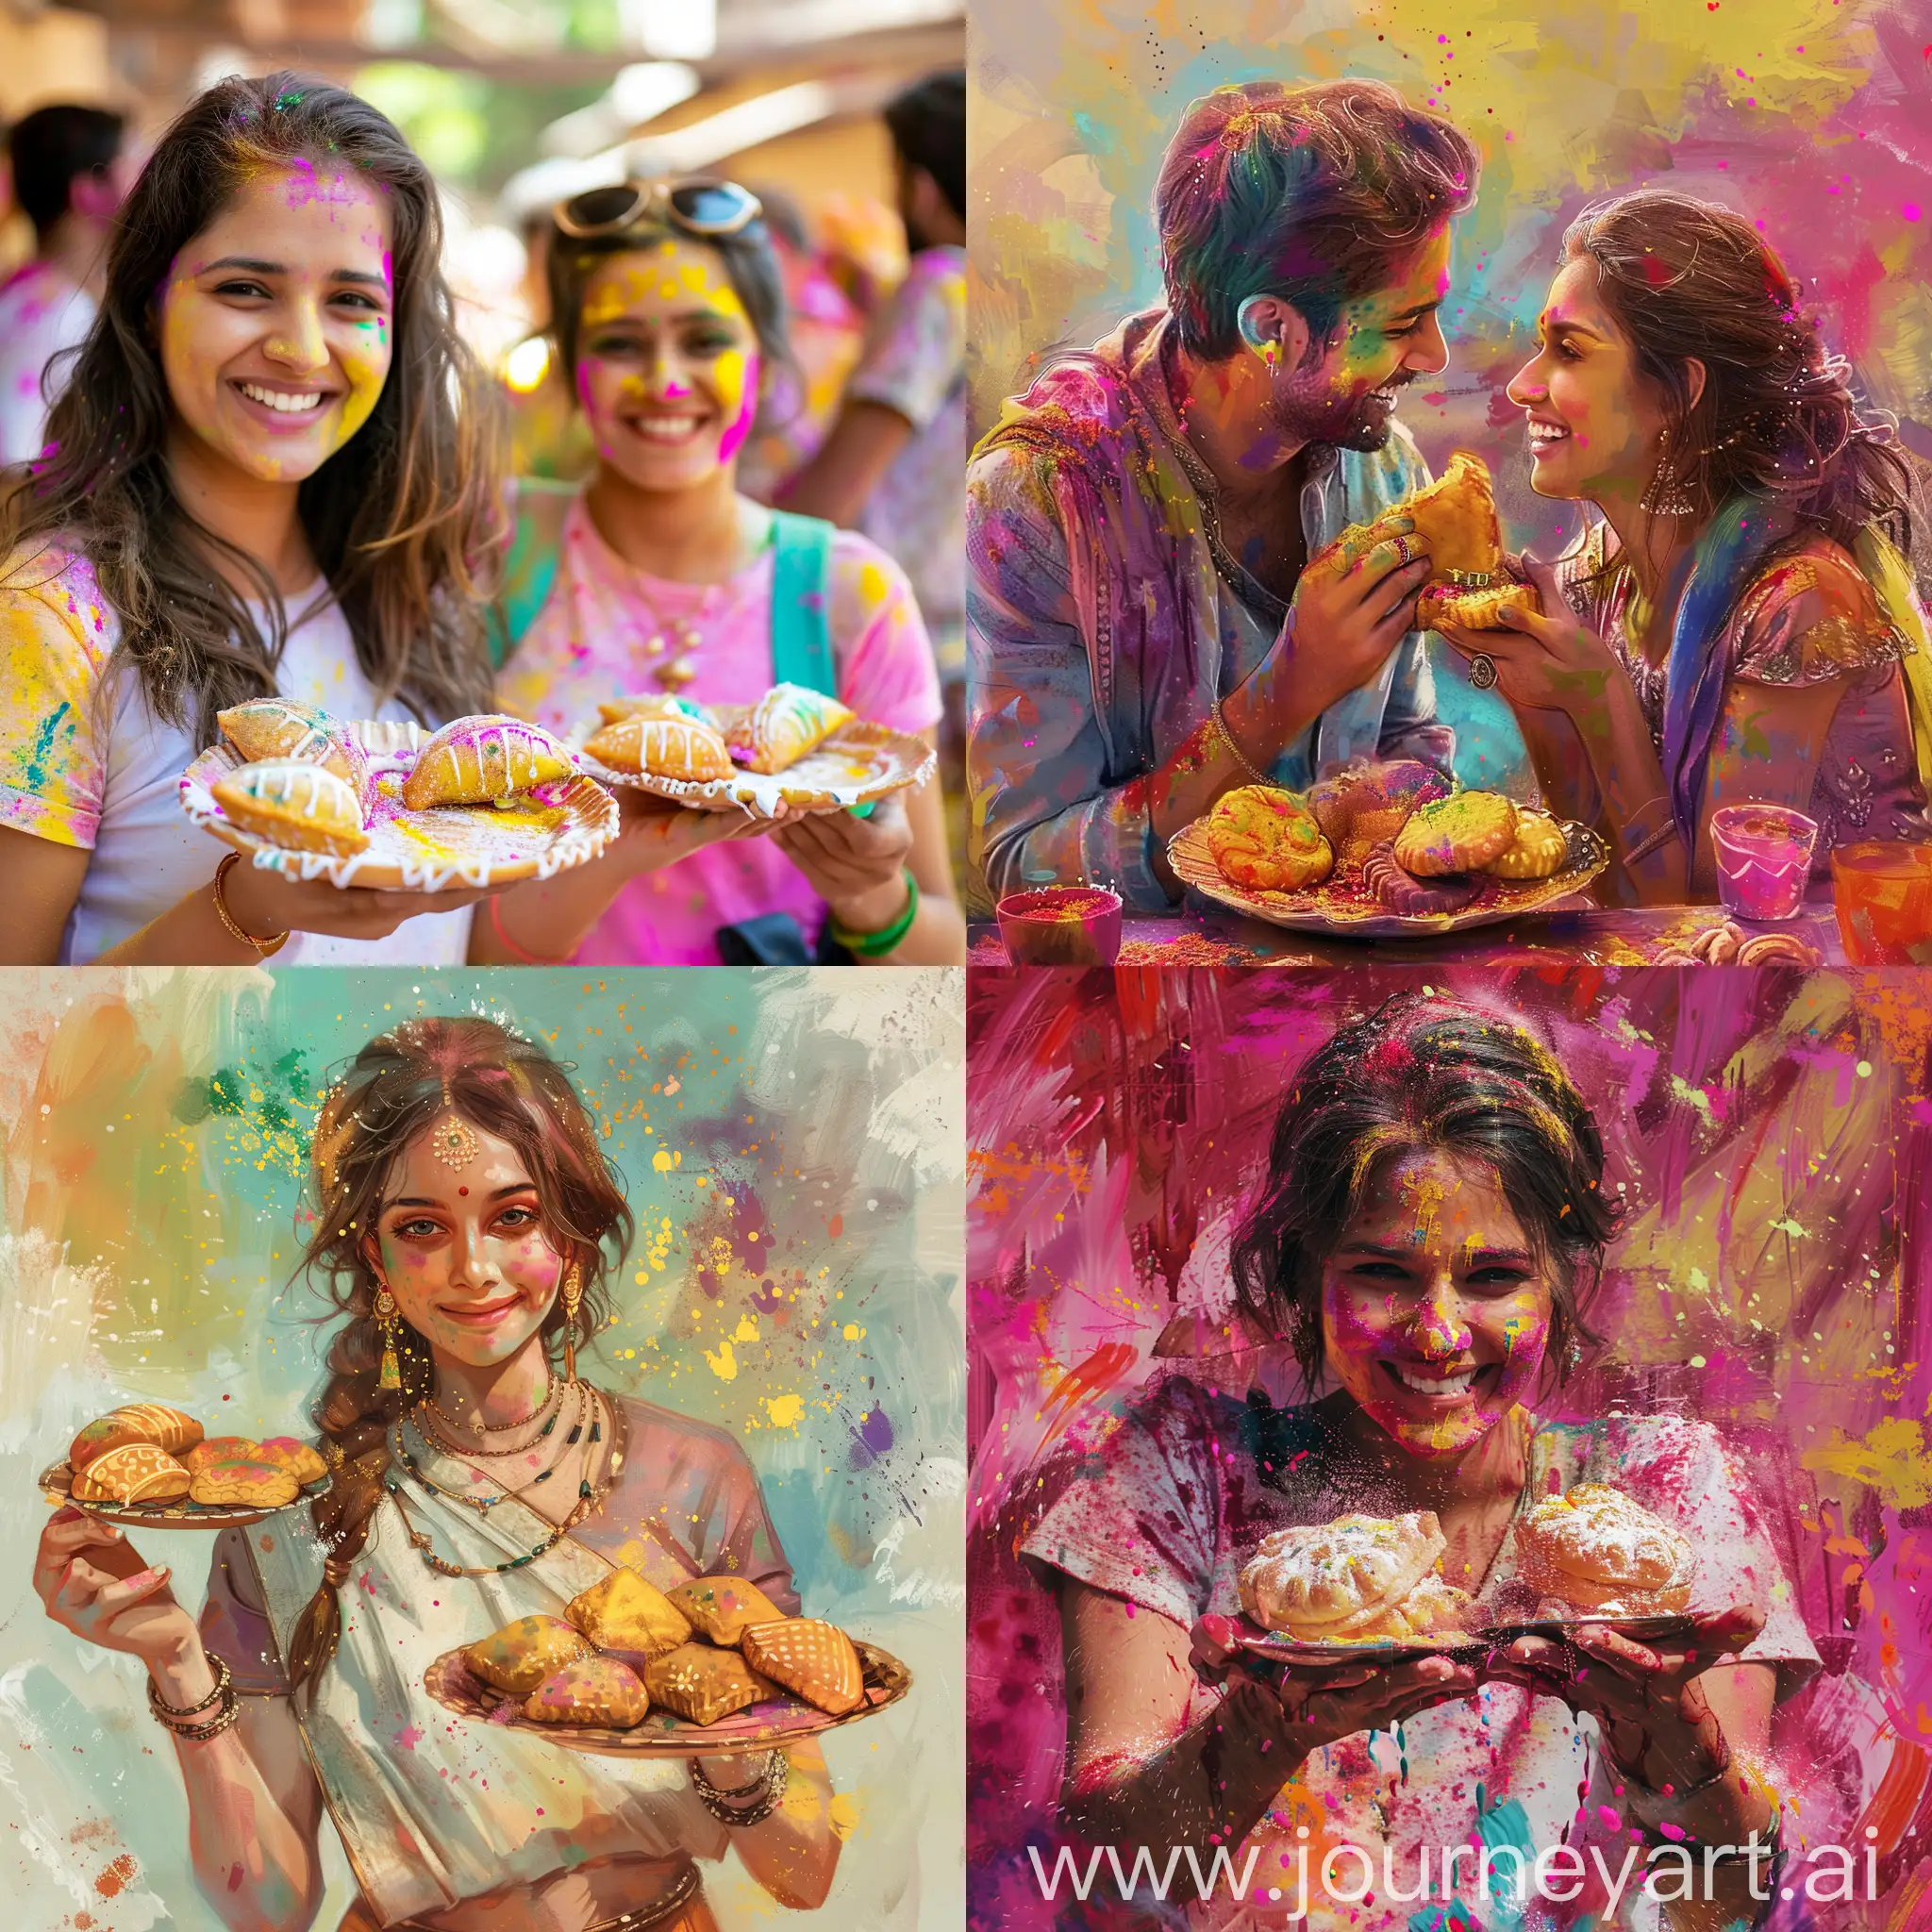 On Holi, calories don't count! It's all about the gulal, gujiyas, and good times!"